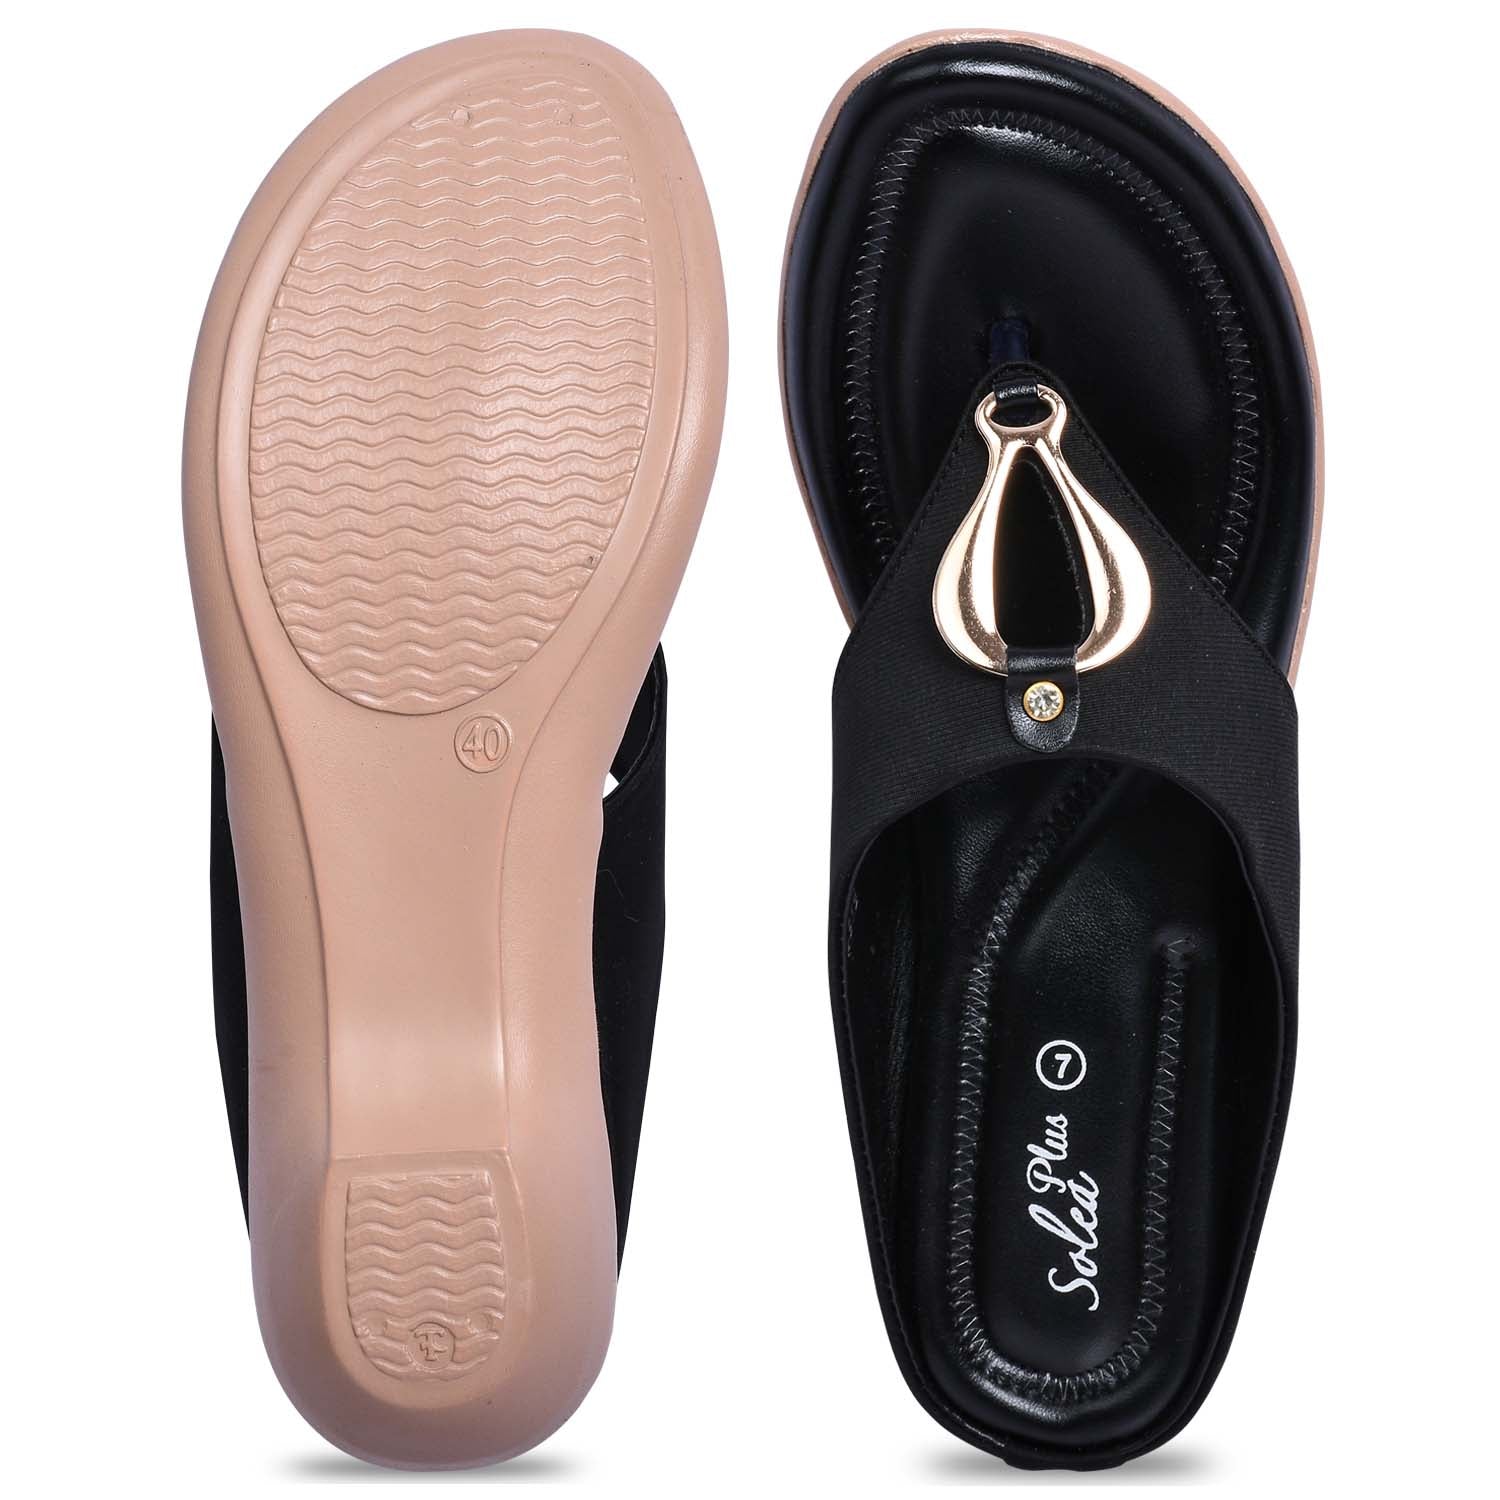 Paragon R1007L Women Sandals | Casual &amp; Formal Sandals | Stylish, Comfortable &amp; Durable | For Daily &amp; Occasion Wear